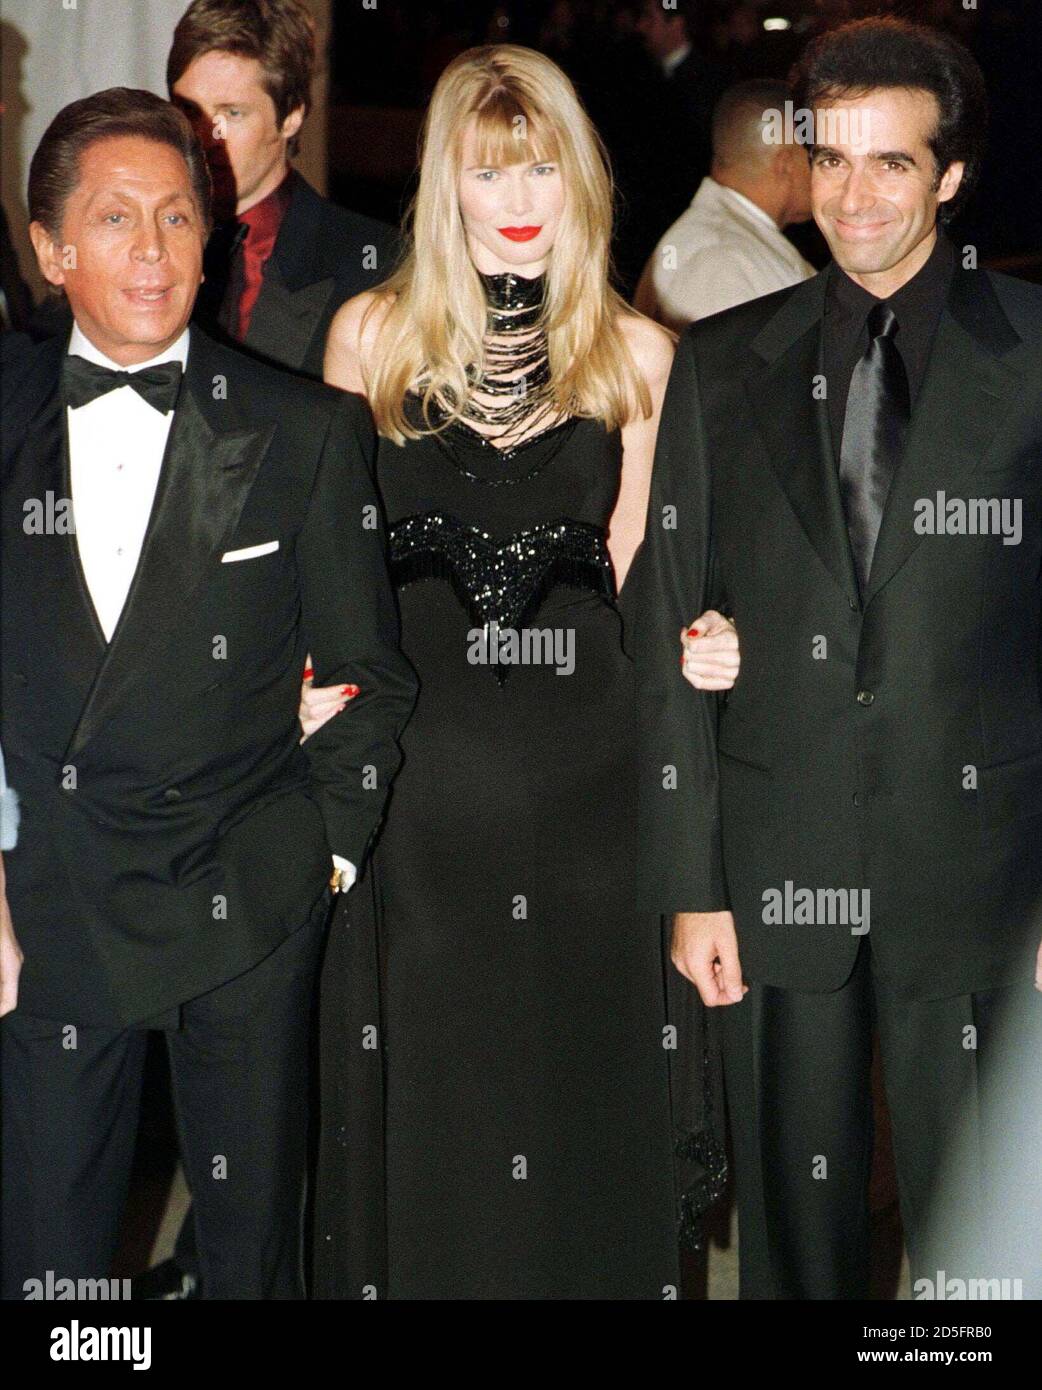 Supermodel Claudia Schiffer (C) poses for photographers with her companion  magician David Copperfield (R) and designer Valentino (L) as the three  arrived at New York's Metropolitan Museum of Art December 8, for